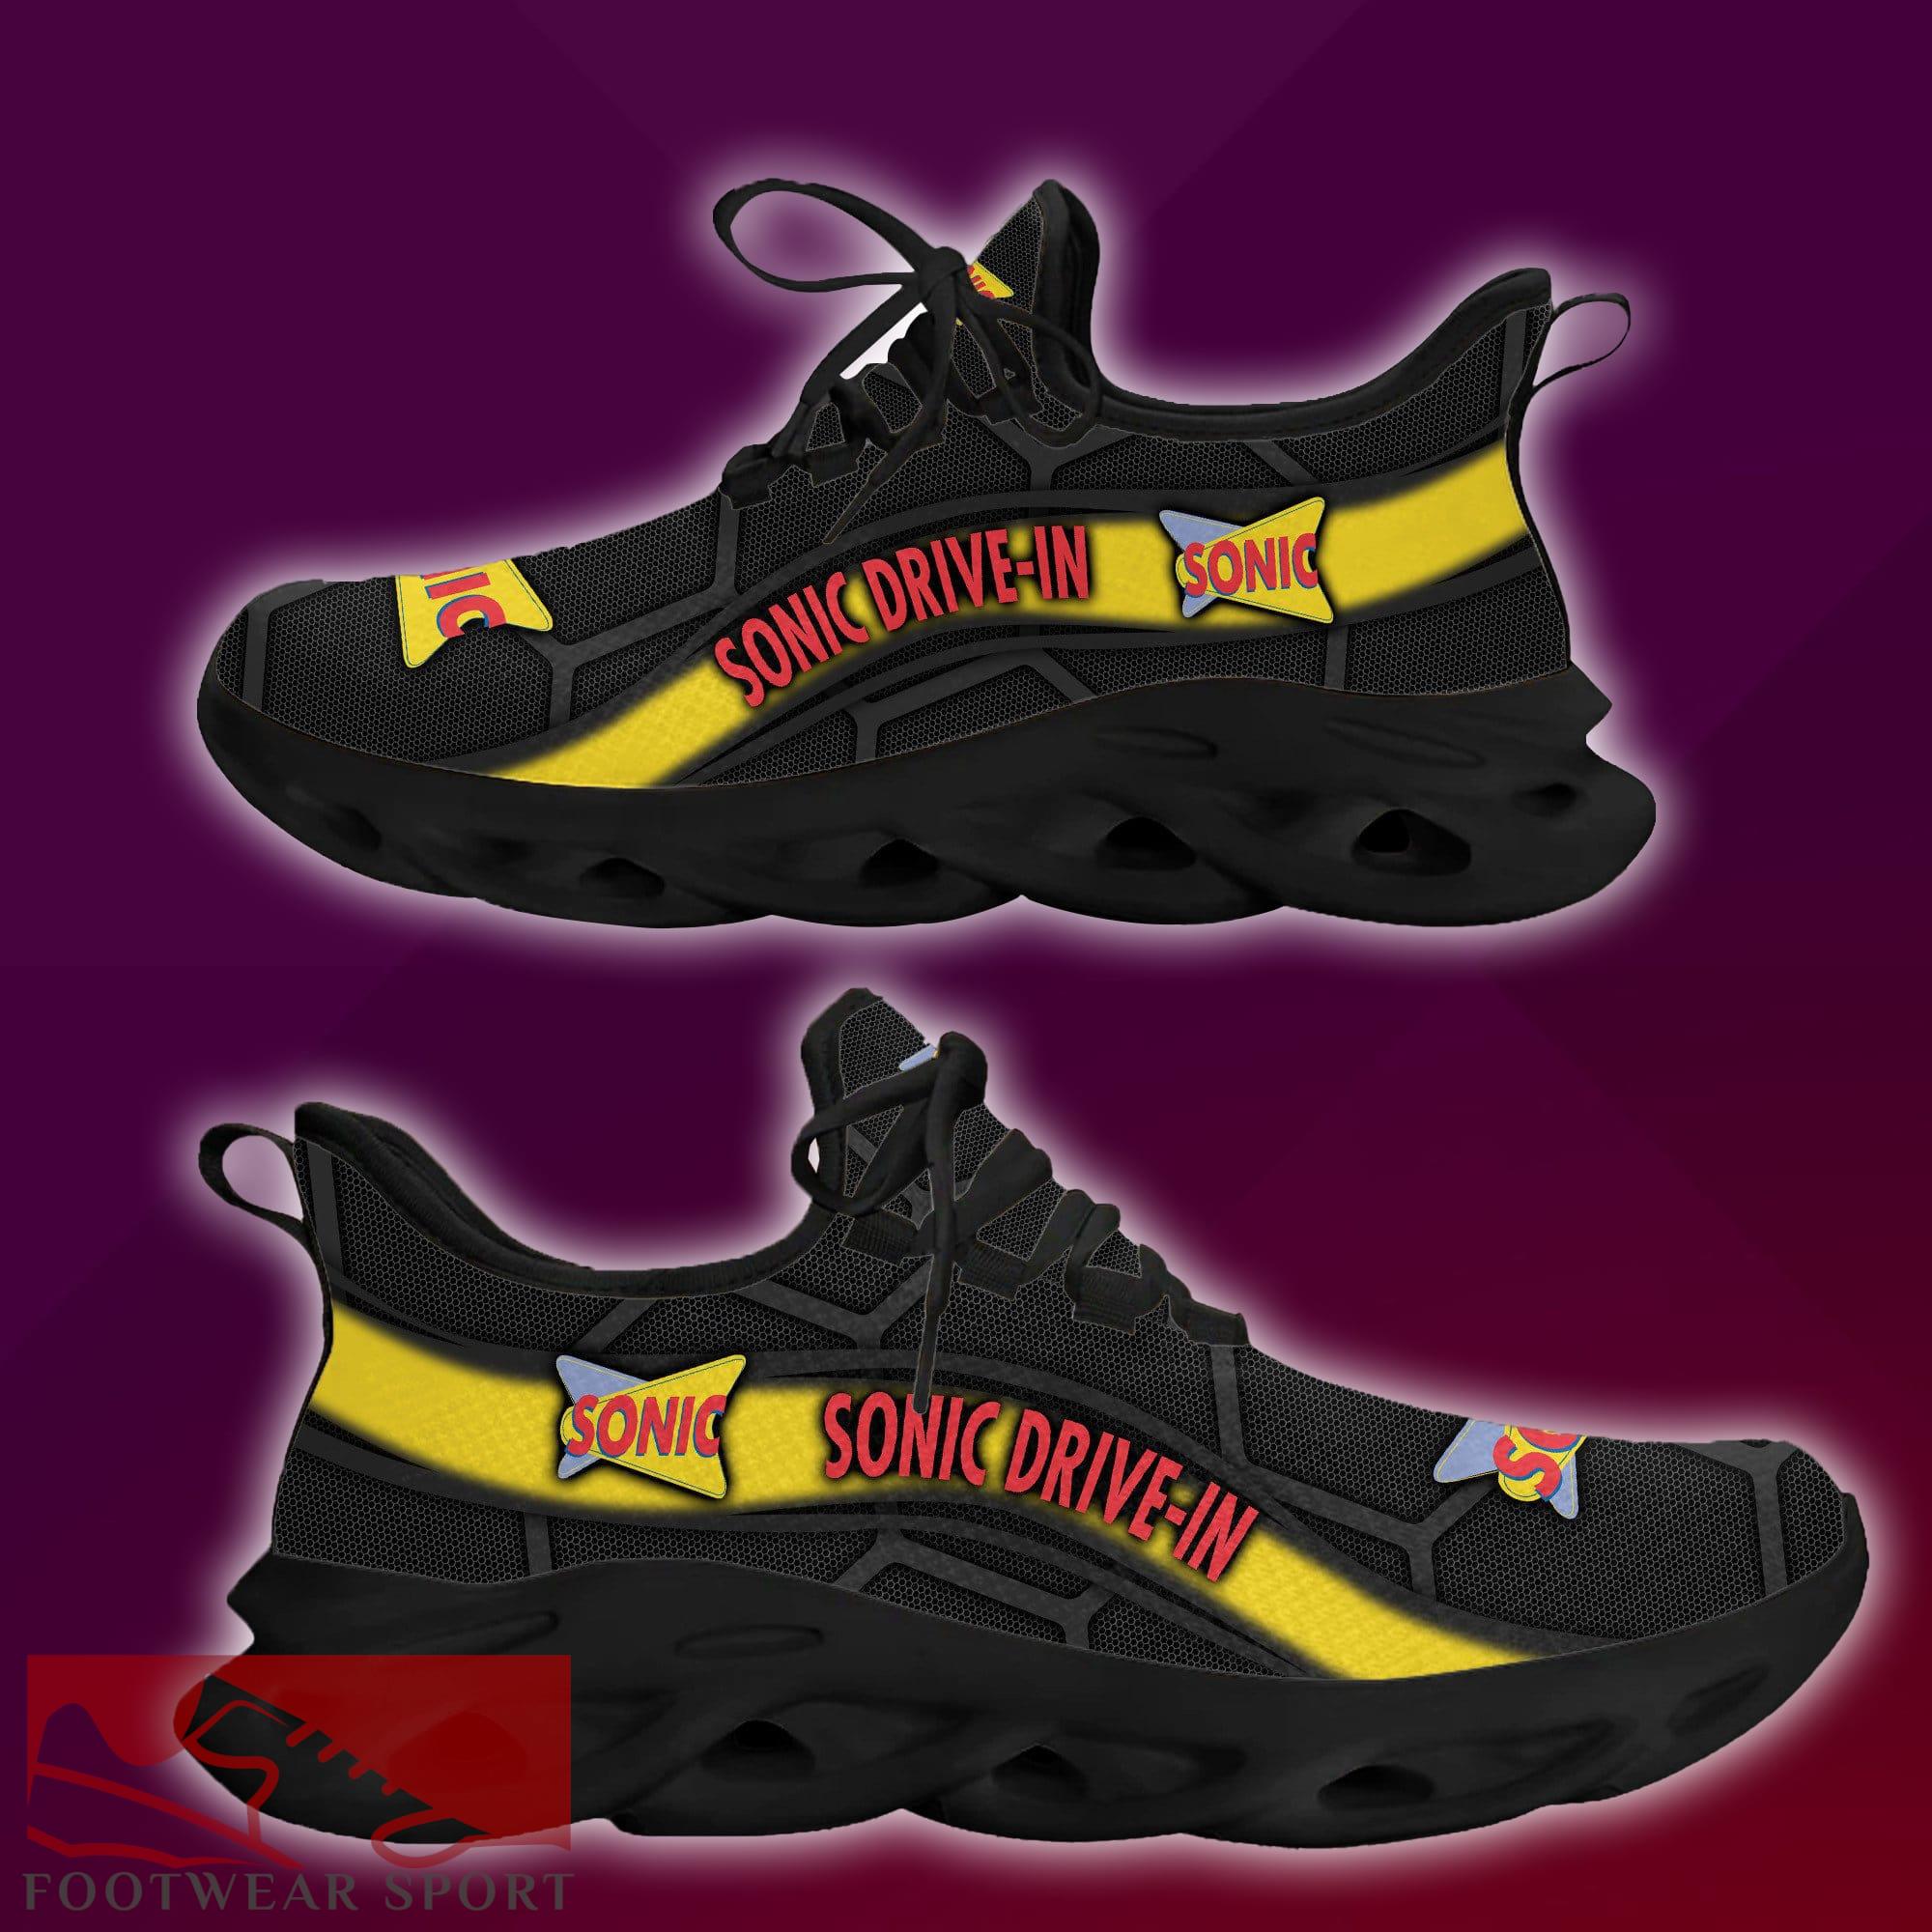 sonic drive-in Brand New Logo Max Soul Sneakers Motif Running Shoes Gift - sonic drive-in New Brand Chunky Shoes Style Max Soul Sneakers Photo 1